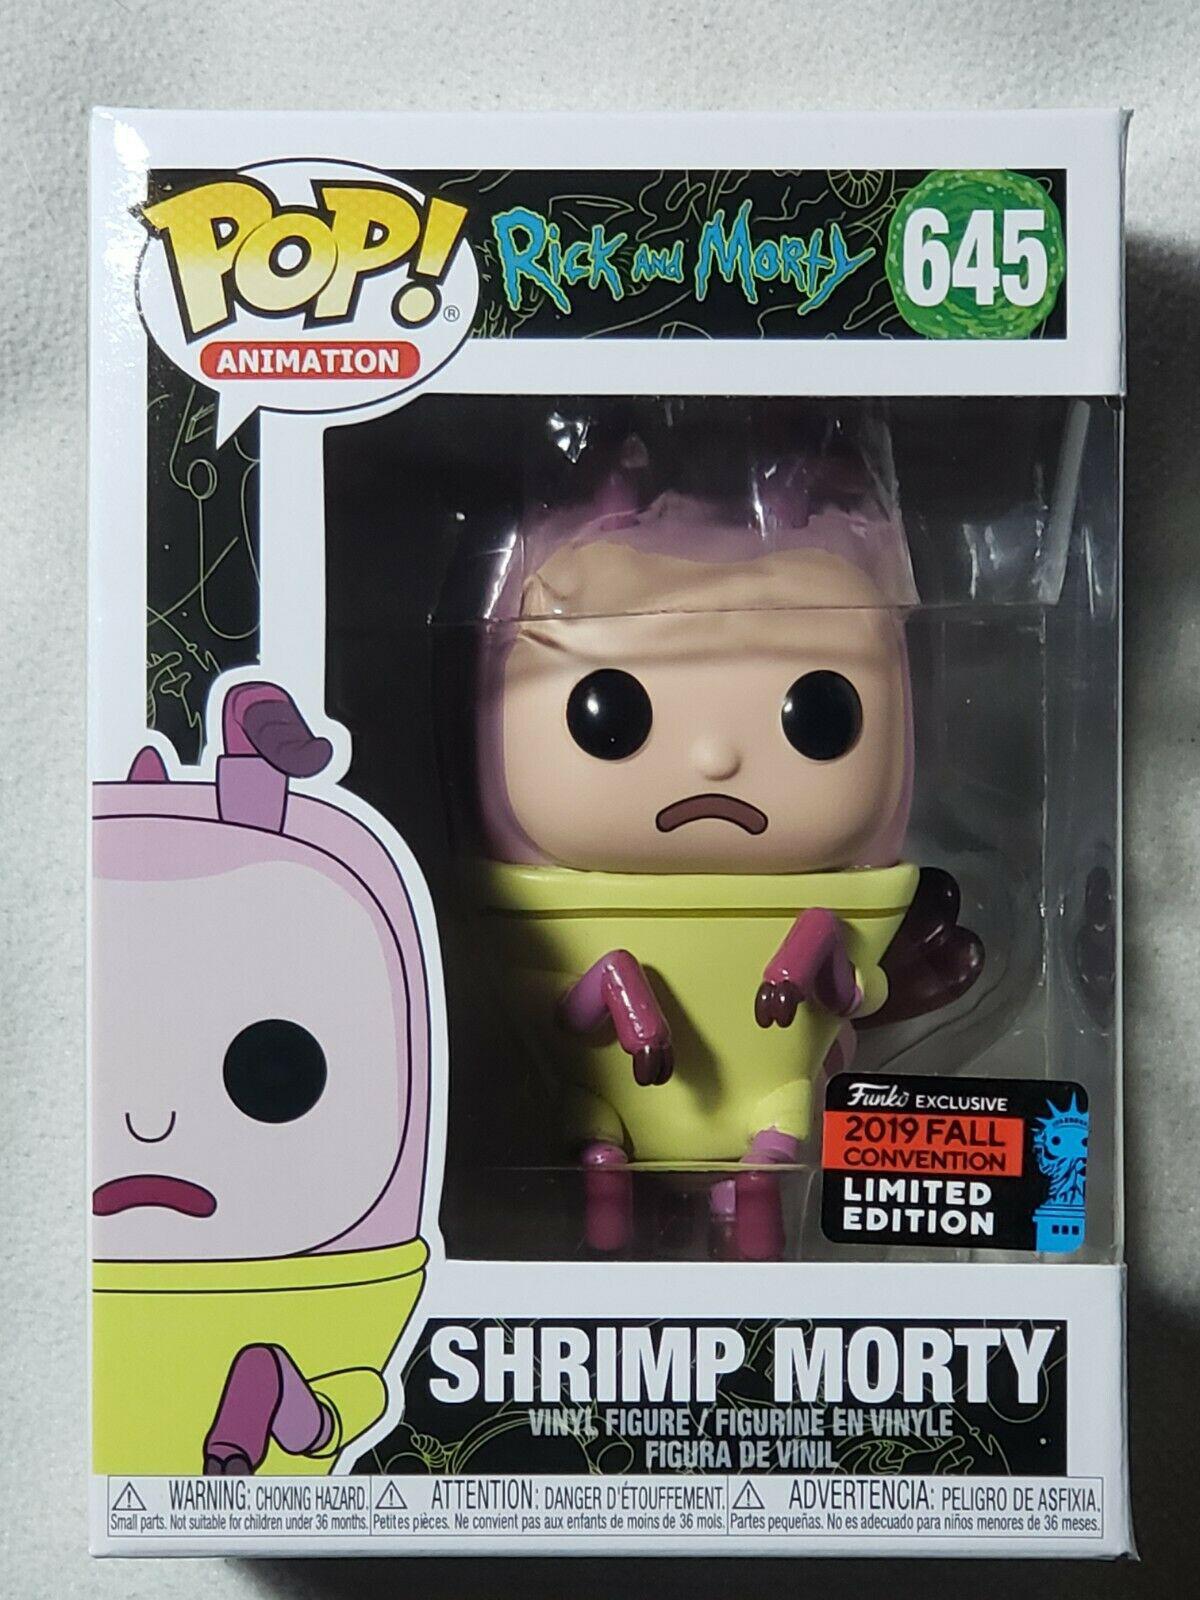 FUNKO POP RICK AND MORTY SHRIMP MORTY NYCC 2019 EXCLUSIVE PROTECTOR